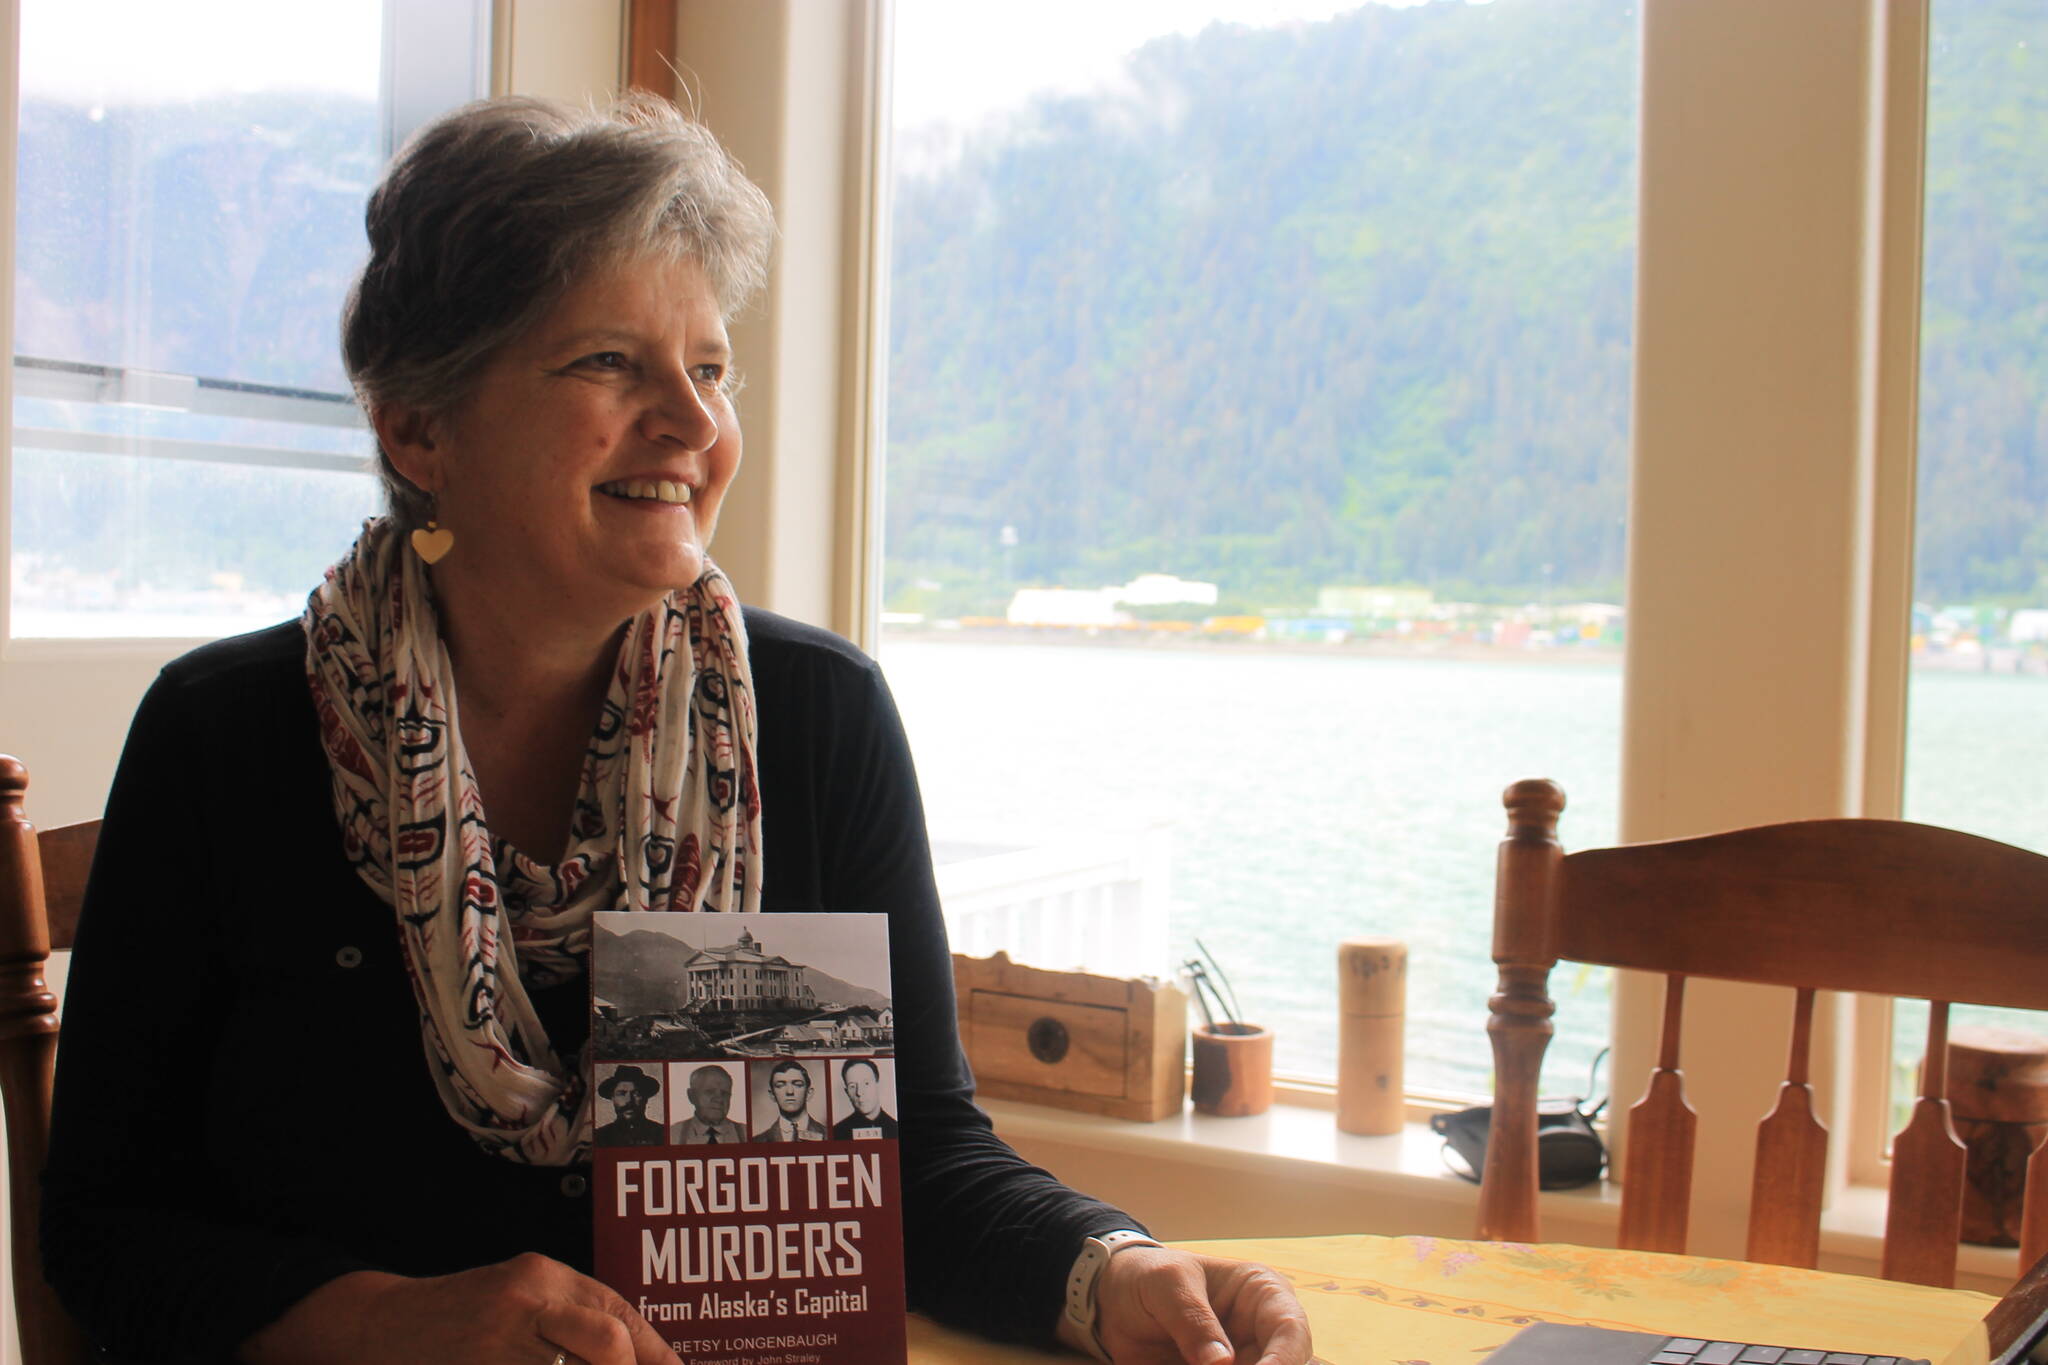 Betsy Longenbaugh sits at the table she spent the majority of her time writing her debut book, “Forgotten Murders from Alaska’s Capital” which recounts 10 long-forgotten murders that occurred in the Juneau-Douglas area between 1902 and 1959. (Clarise Larson / Juneau Empire)